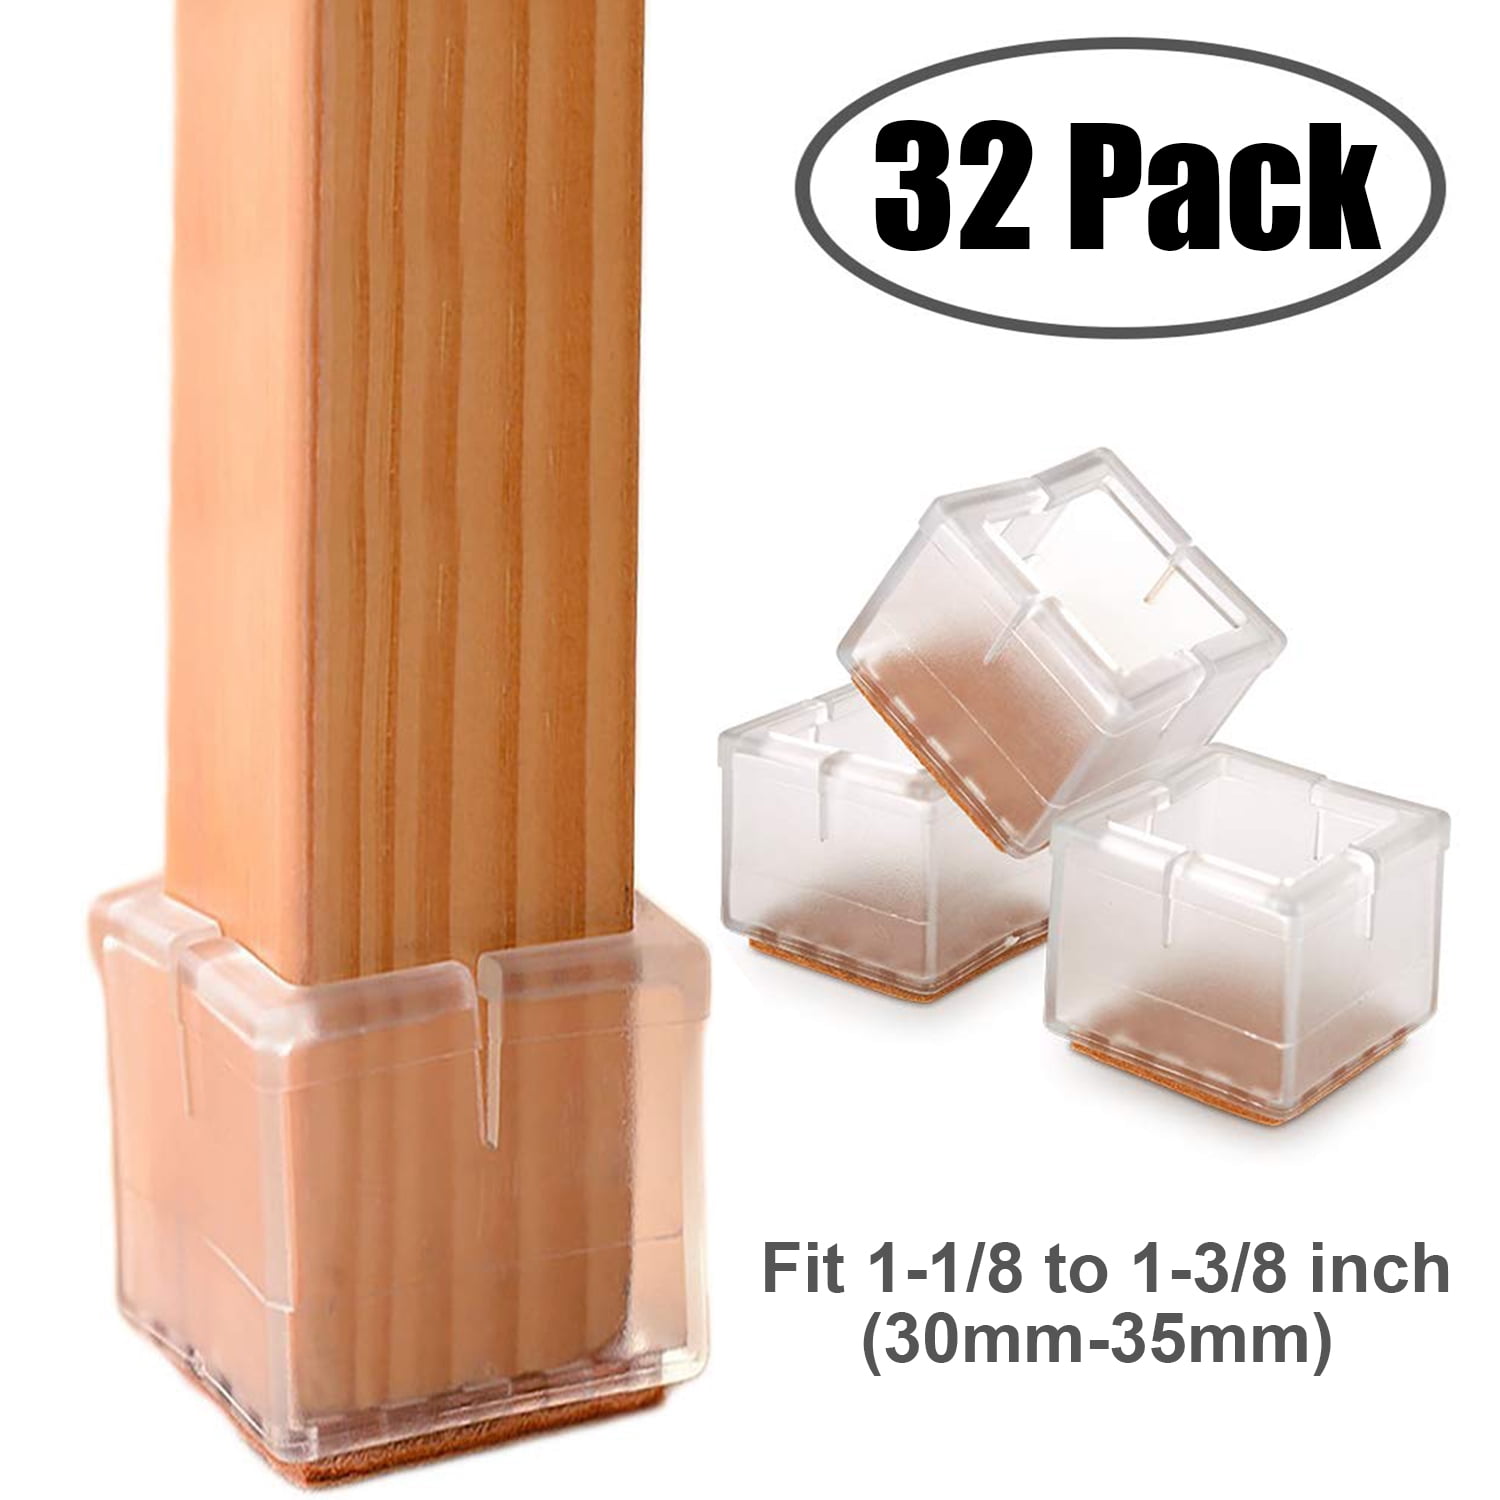 Square Chair Leg Caps Floor Protectors Fit Square Legs Length 1 1/8-1 3/8 ,Round Furniture Cups Table Feet Protectors Flexible SiliconeFurniture Pads Covers for Hardwood Floors 12 Pack 30-35mm